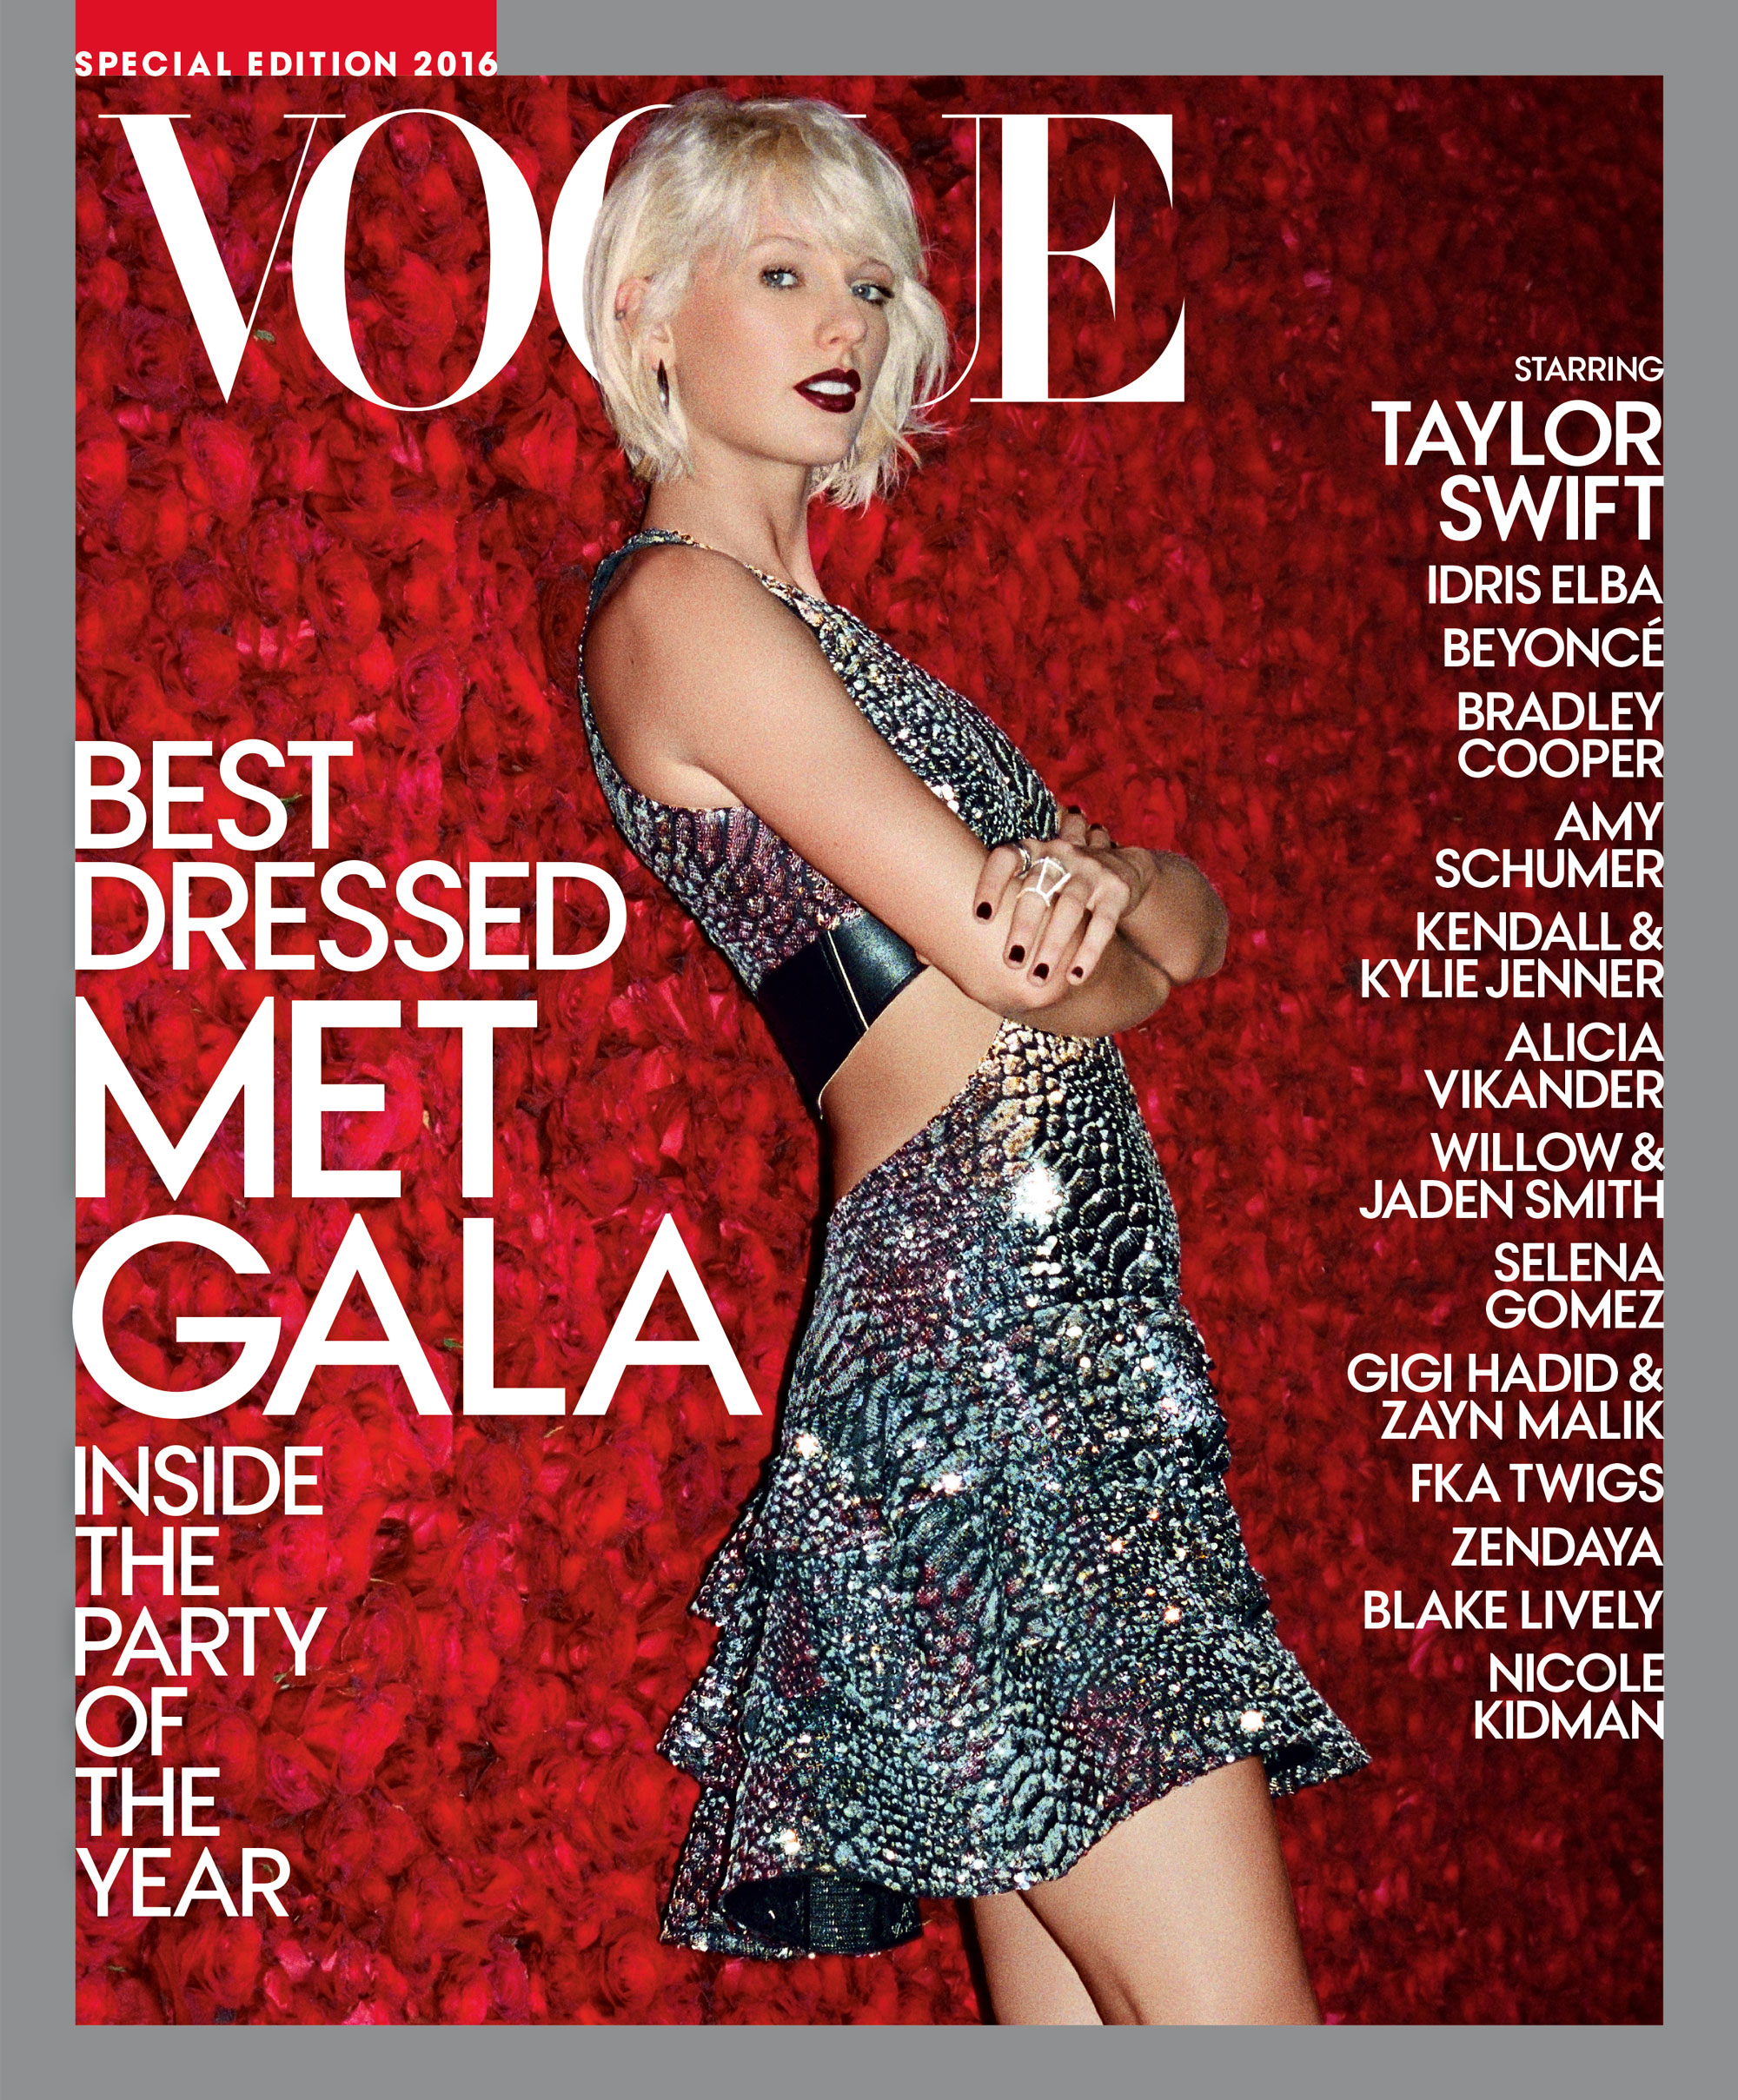 met-gala-vogue-special-edition-taylor-swift-coverlines.jpg